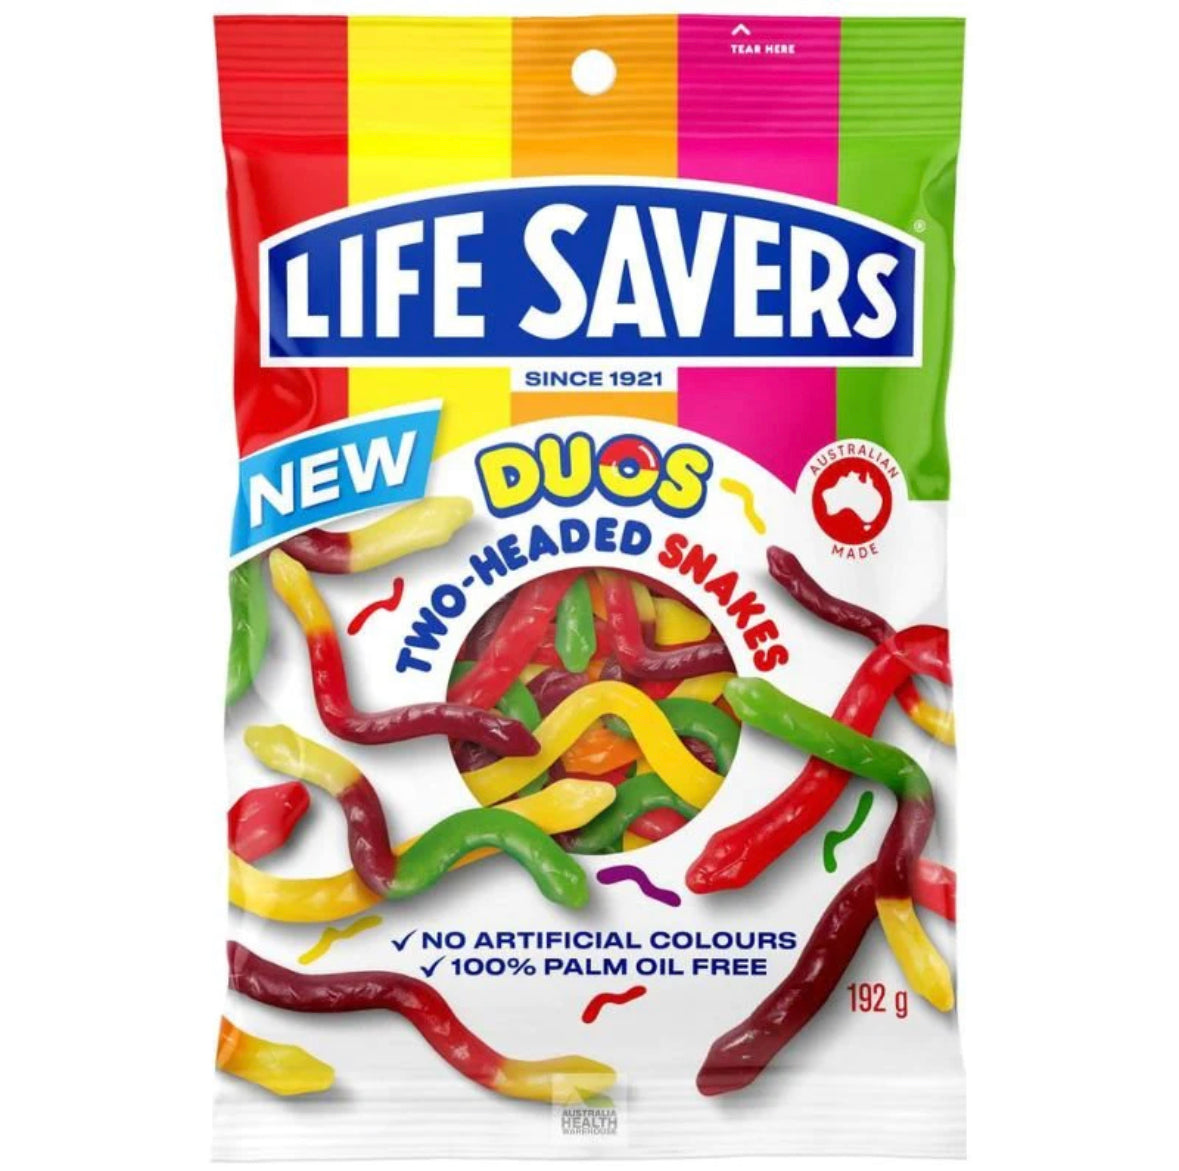 Lifesaver Duo Two-Headed Snakes